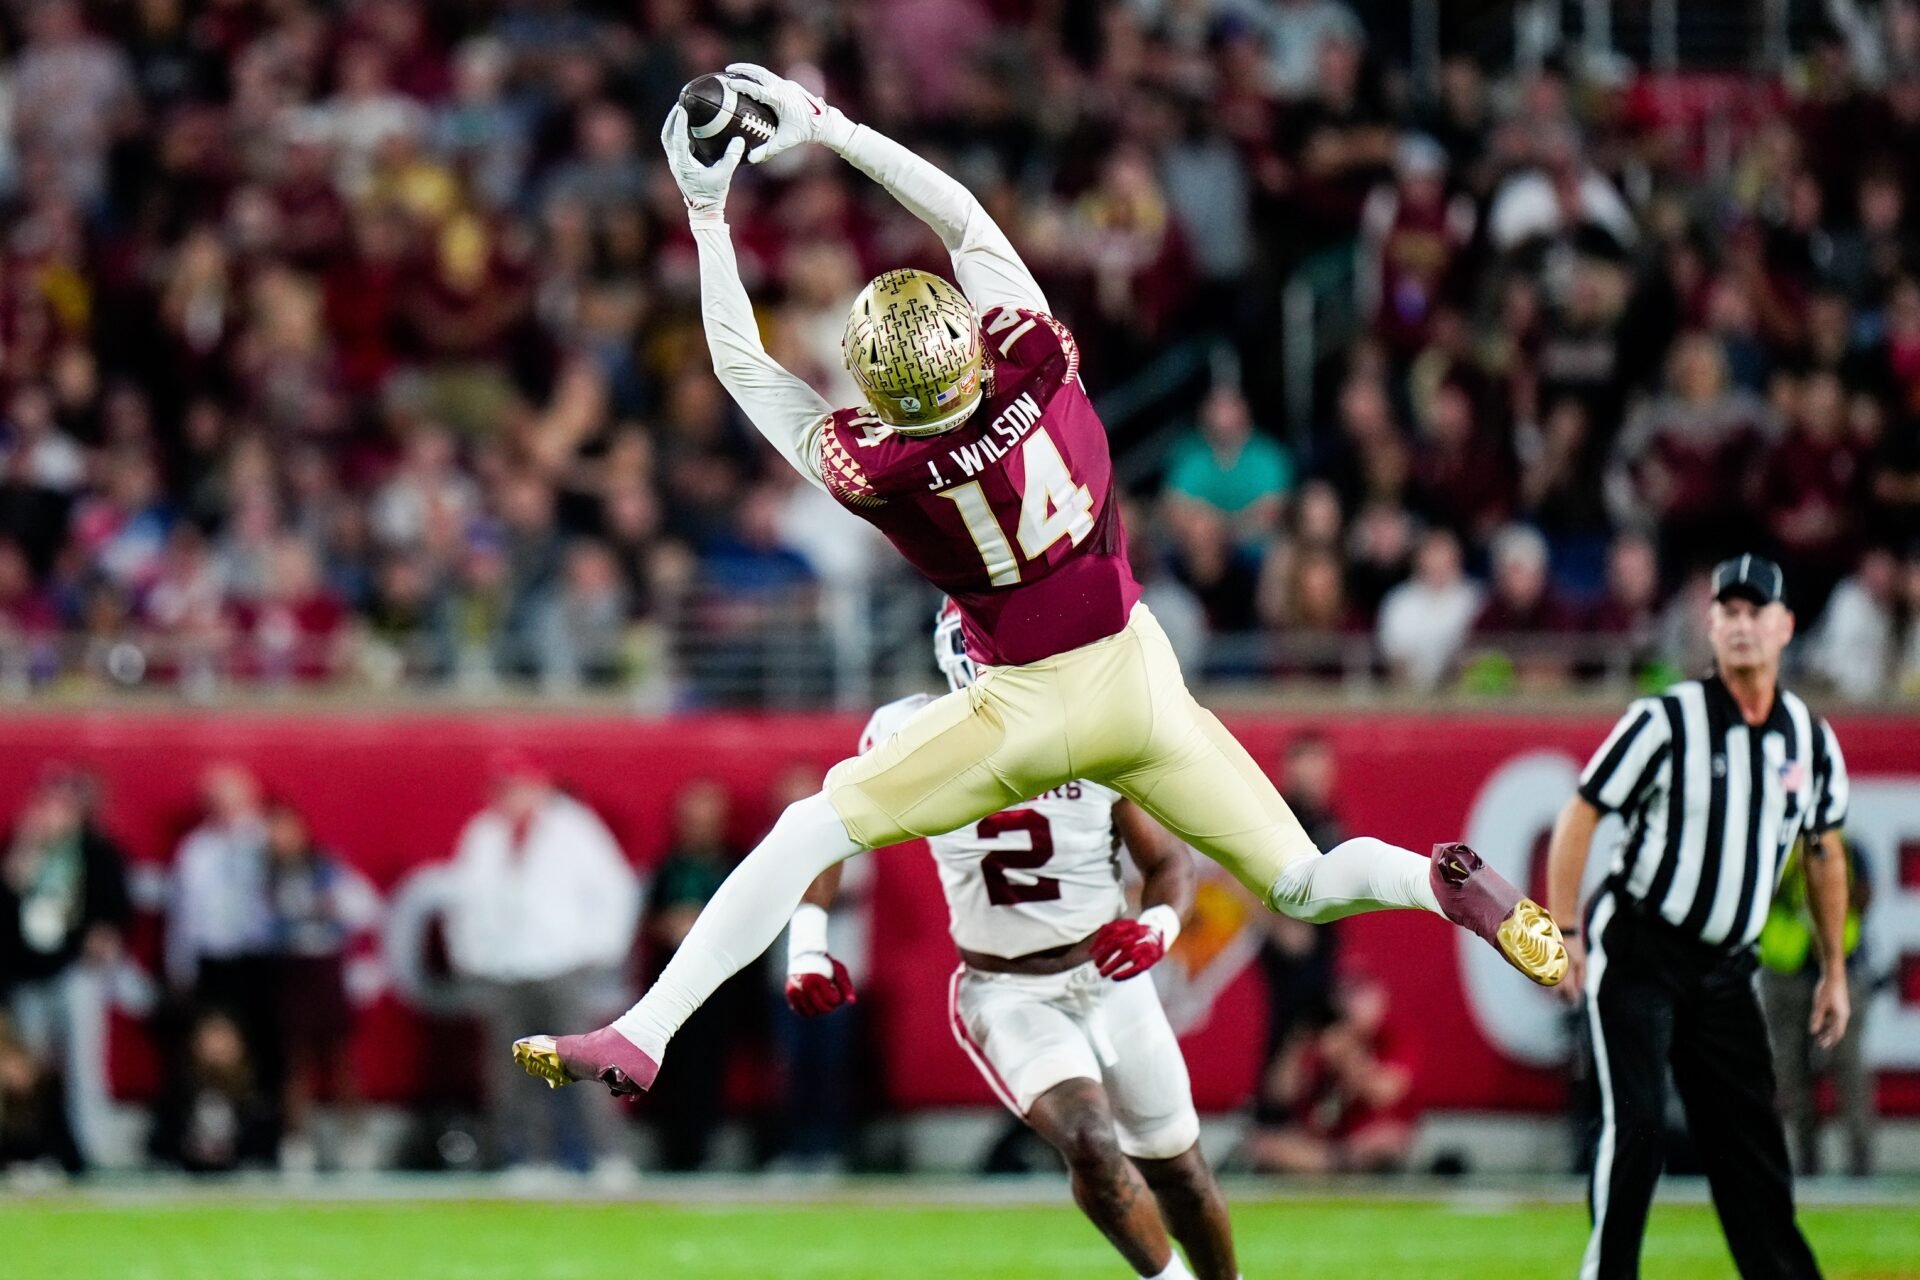 Florida State Seminoles wide receiver Johnny Wilson (14) catches a pass against the Oklahoma Sooners during the second half in the 2022 Cheez-It Bowl at Camping World Stadium.